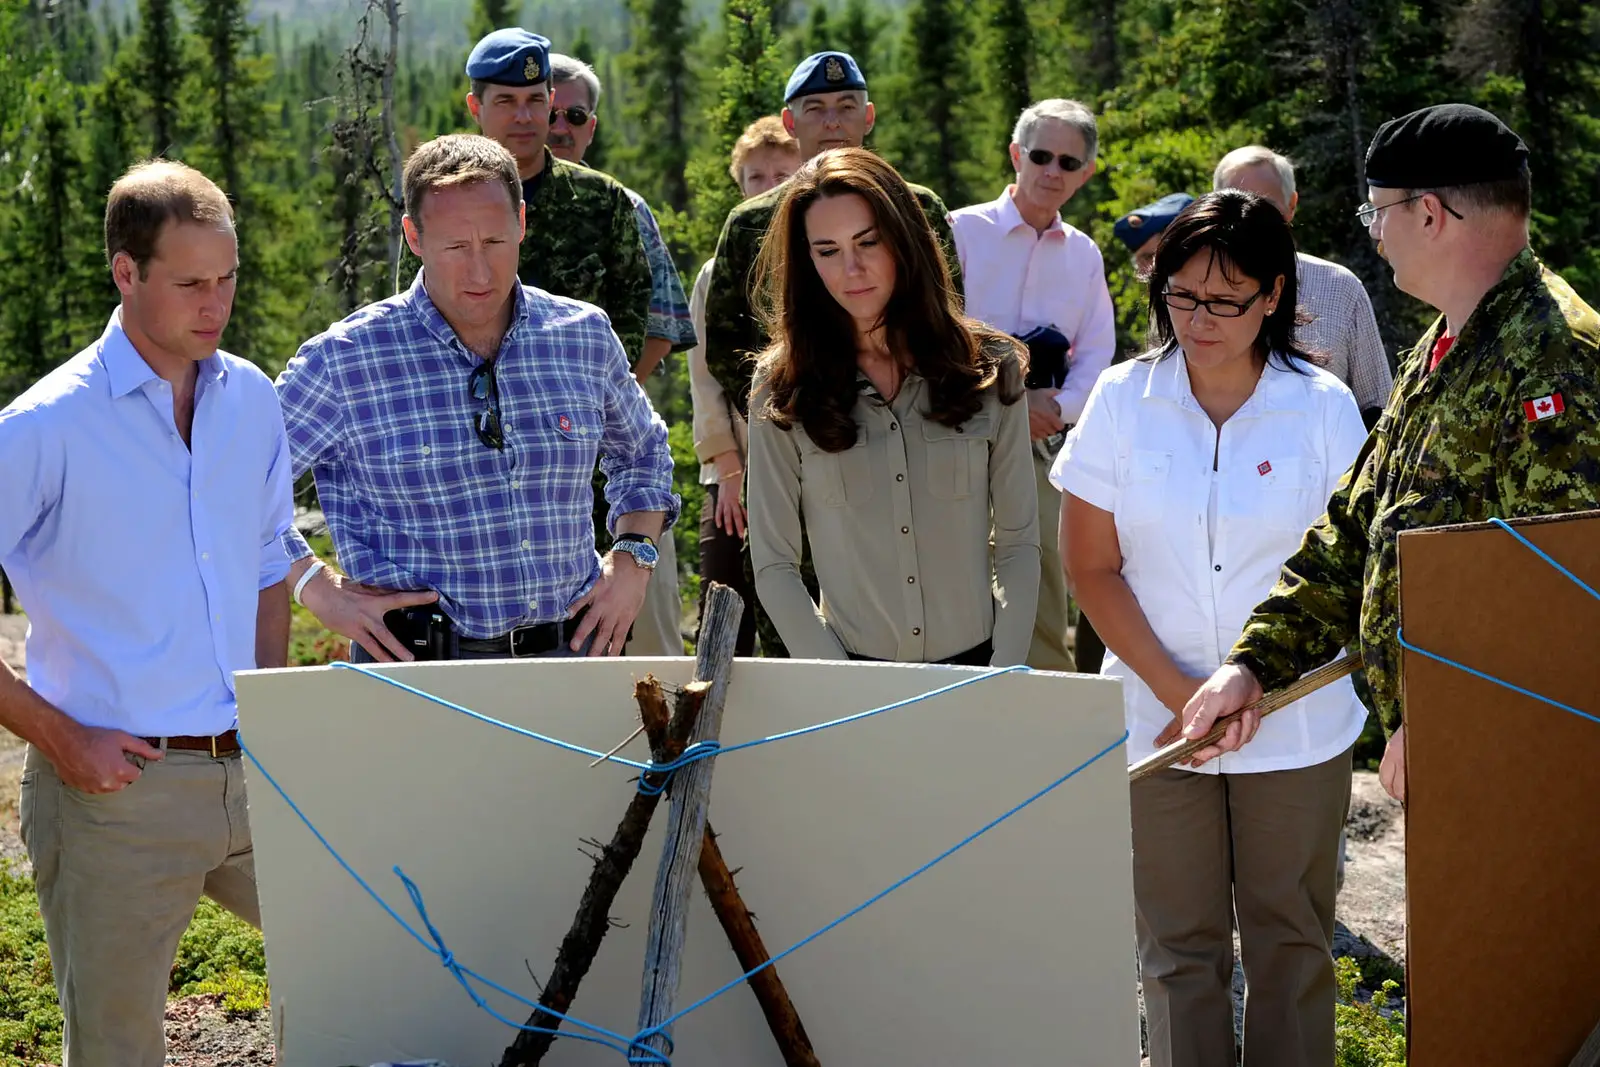 The Duke and Duchess of Cambridge in Blachford lake during canada tour in 2011